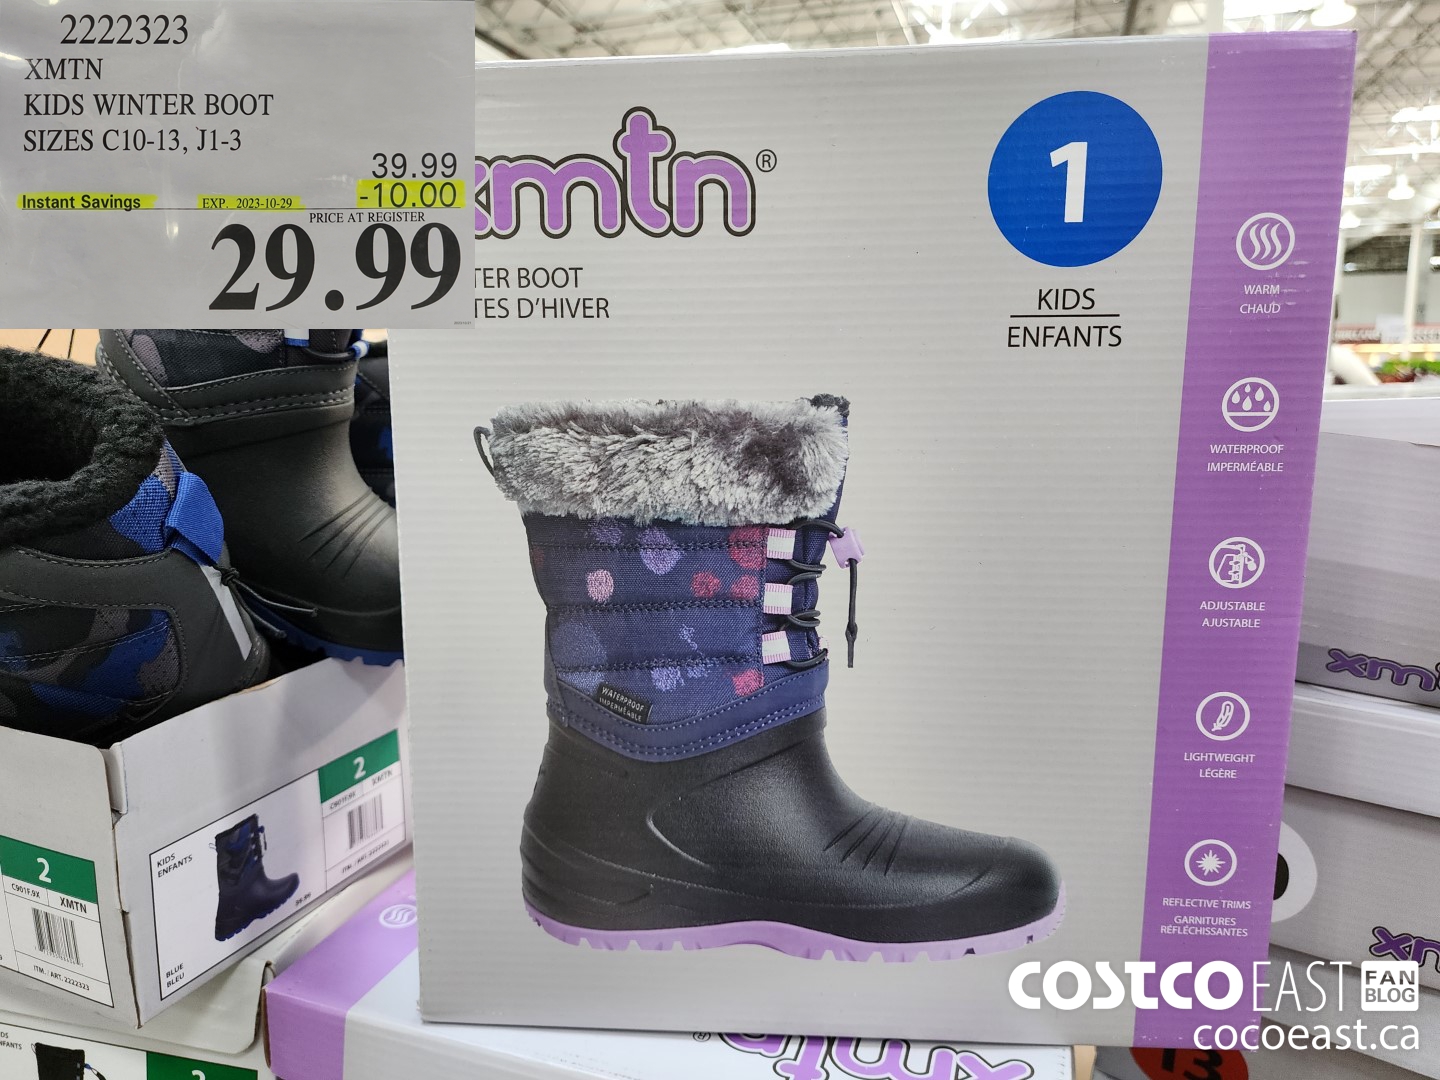 1224567 LUCKY BRAND COTTON BOOT SOCK LADIES SIZES 5 10 5 00 INSTANT SAVINGS  EXPIRES ON 2023 10 29 13 99 - Costco East Fan Blog